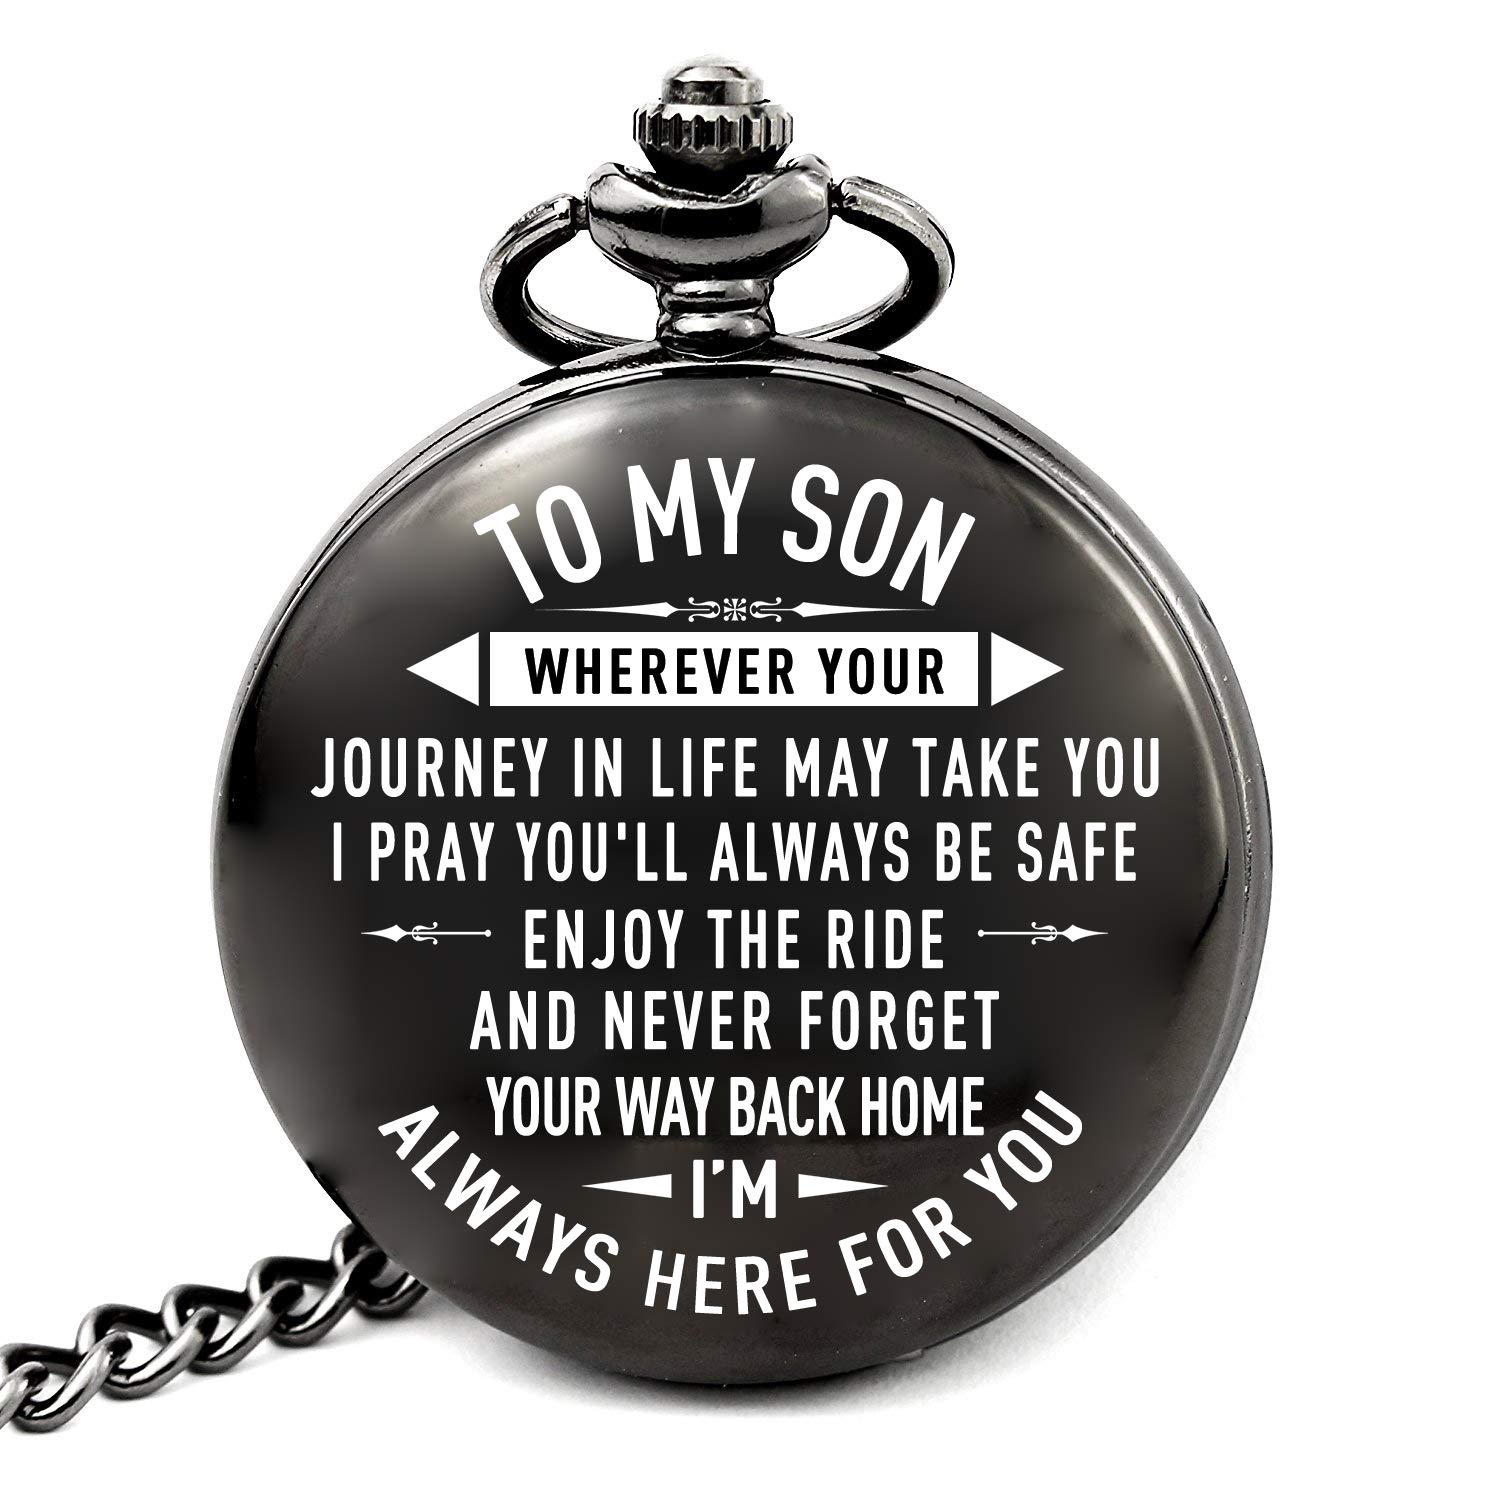 levonta Gifts for Men Husband Son Brother Grandson Dad, Personalized Pocket Watch Gift for Him